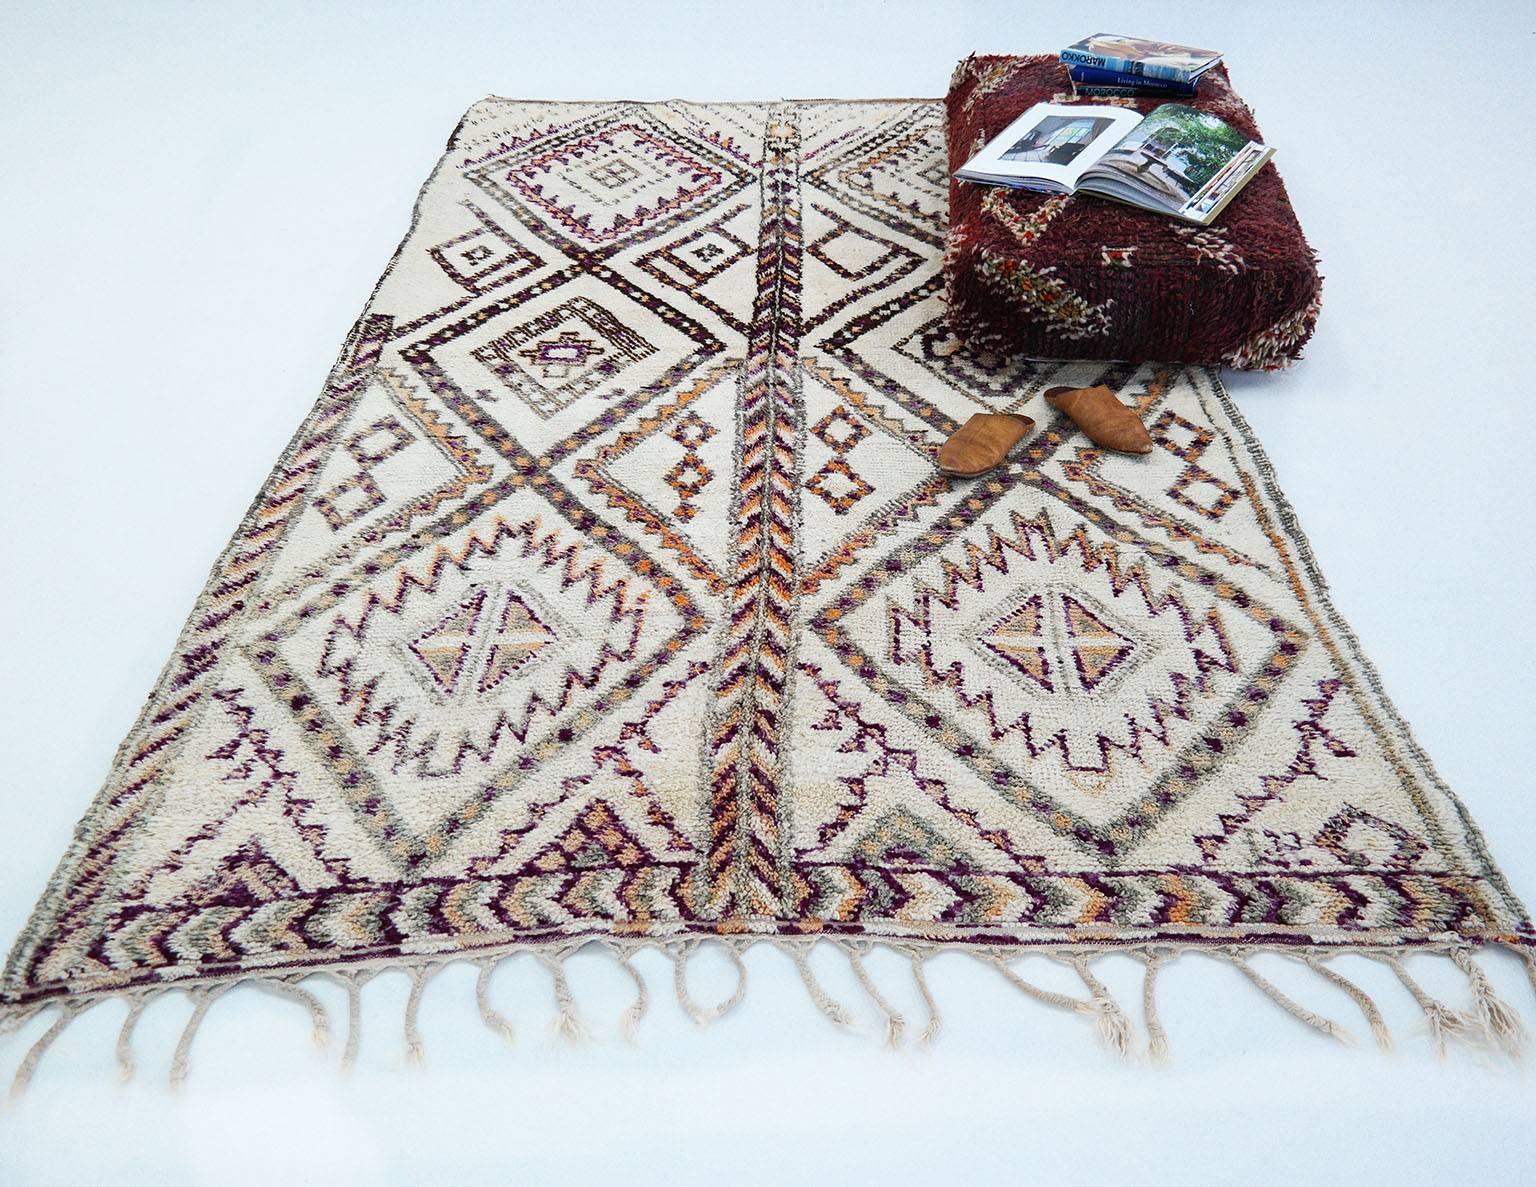 Beni Ourain rug

As stunning vintage Moroccan rug in great condition. This beauty has a pattern with beautiful color accent and a warm butter cream base. The shades of orange and aubergine purple are naturel dye. 
Beni Ourain rugs have a story to